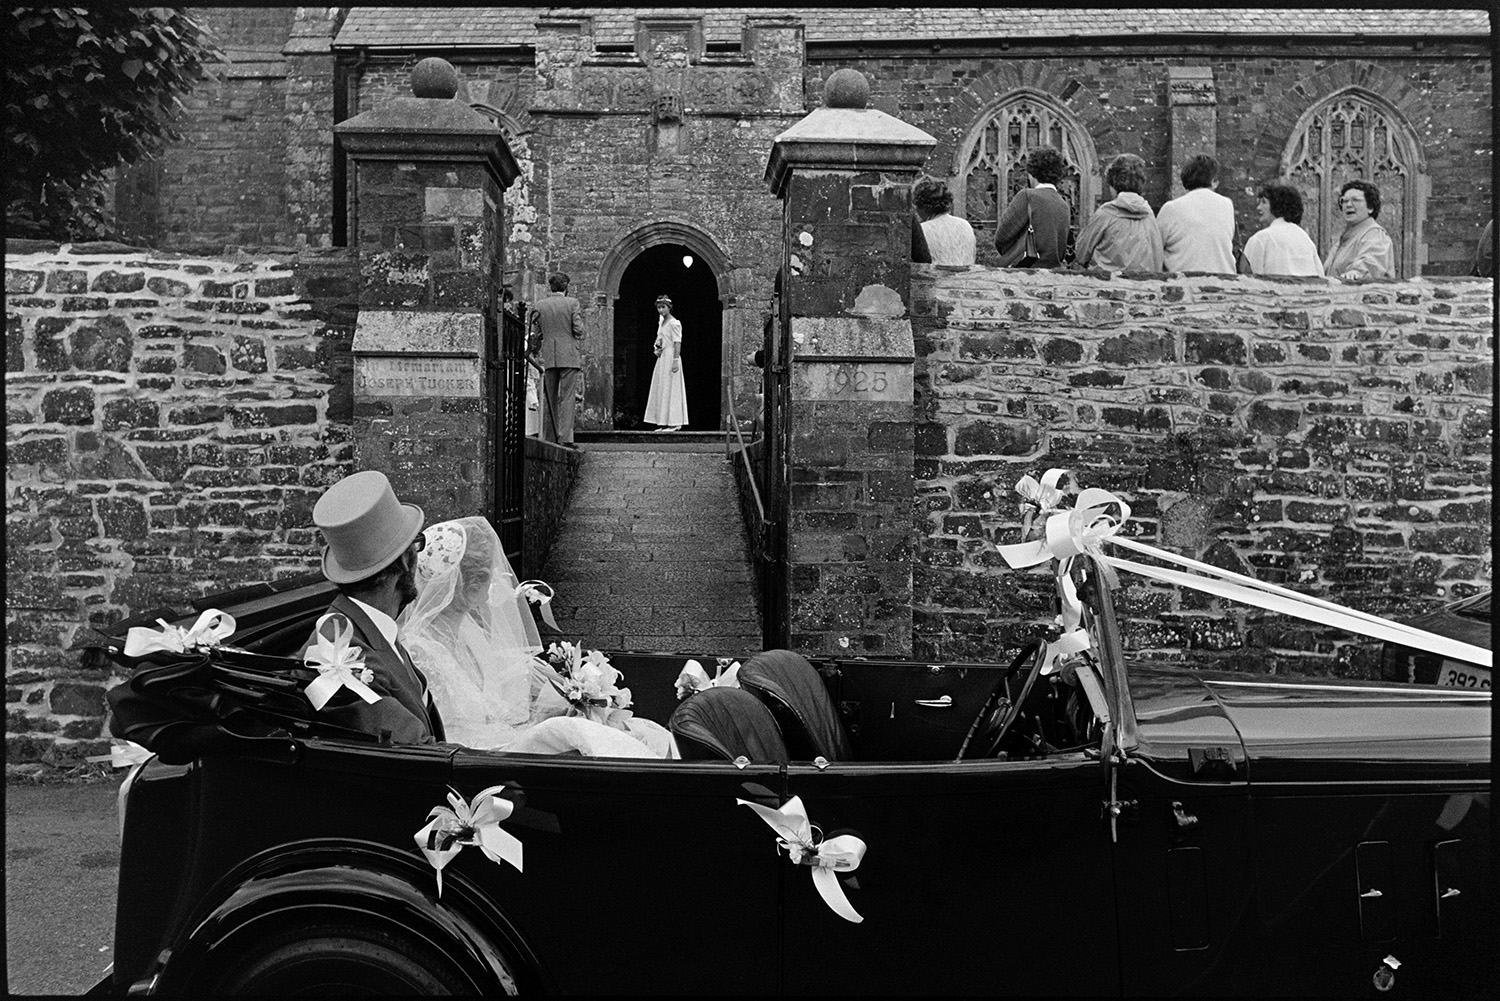 Onlookers at wedding, bride and groom arriving and leaving church in vintage car.
[A bride with her father arriving for her wedding at Chulmleigh Church in a vintage car decorated with ribbons. People are leaning on the church wall watching and a bridesmaid can be seen standing in the church porch.]